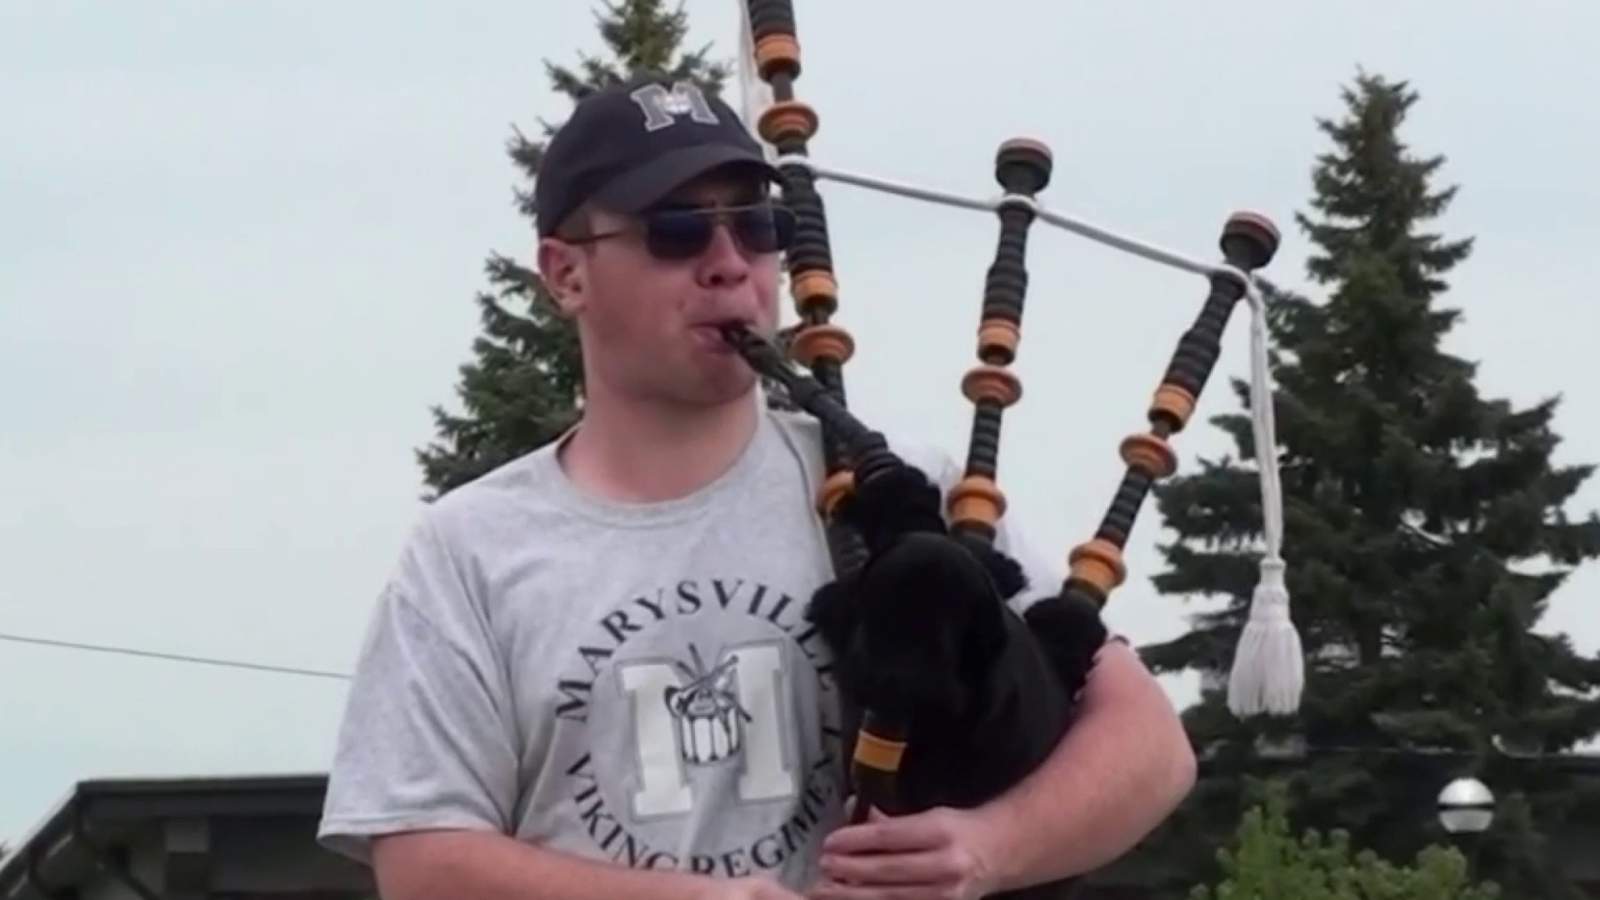 Marysville teen plays bagpipes outside to help keep morale up during COVID-19 pandemic